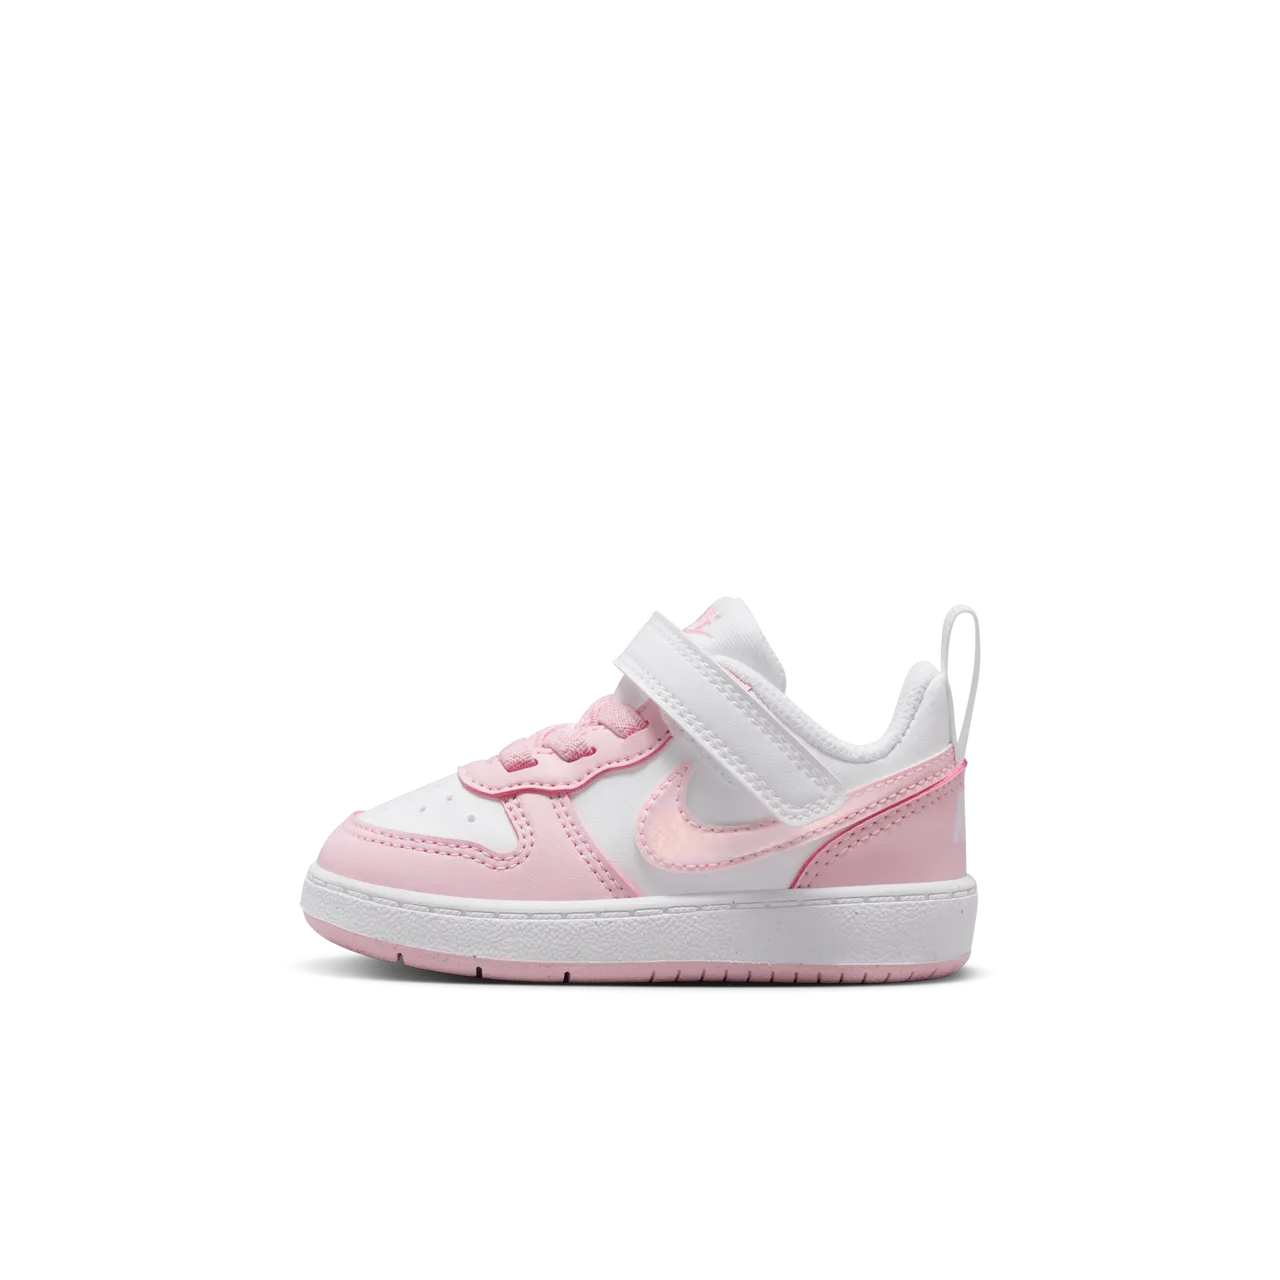 Nike Court Borough Low Recraft Baby/Toddler Shoes - White